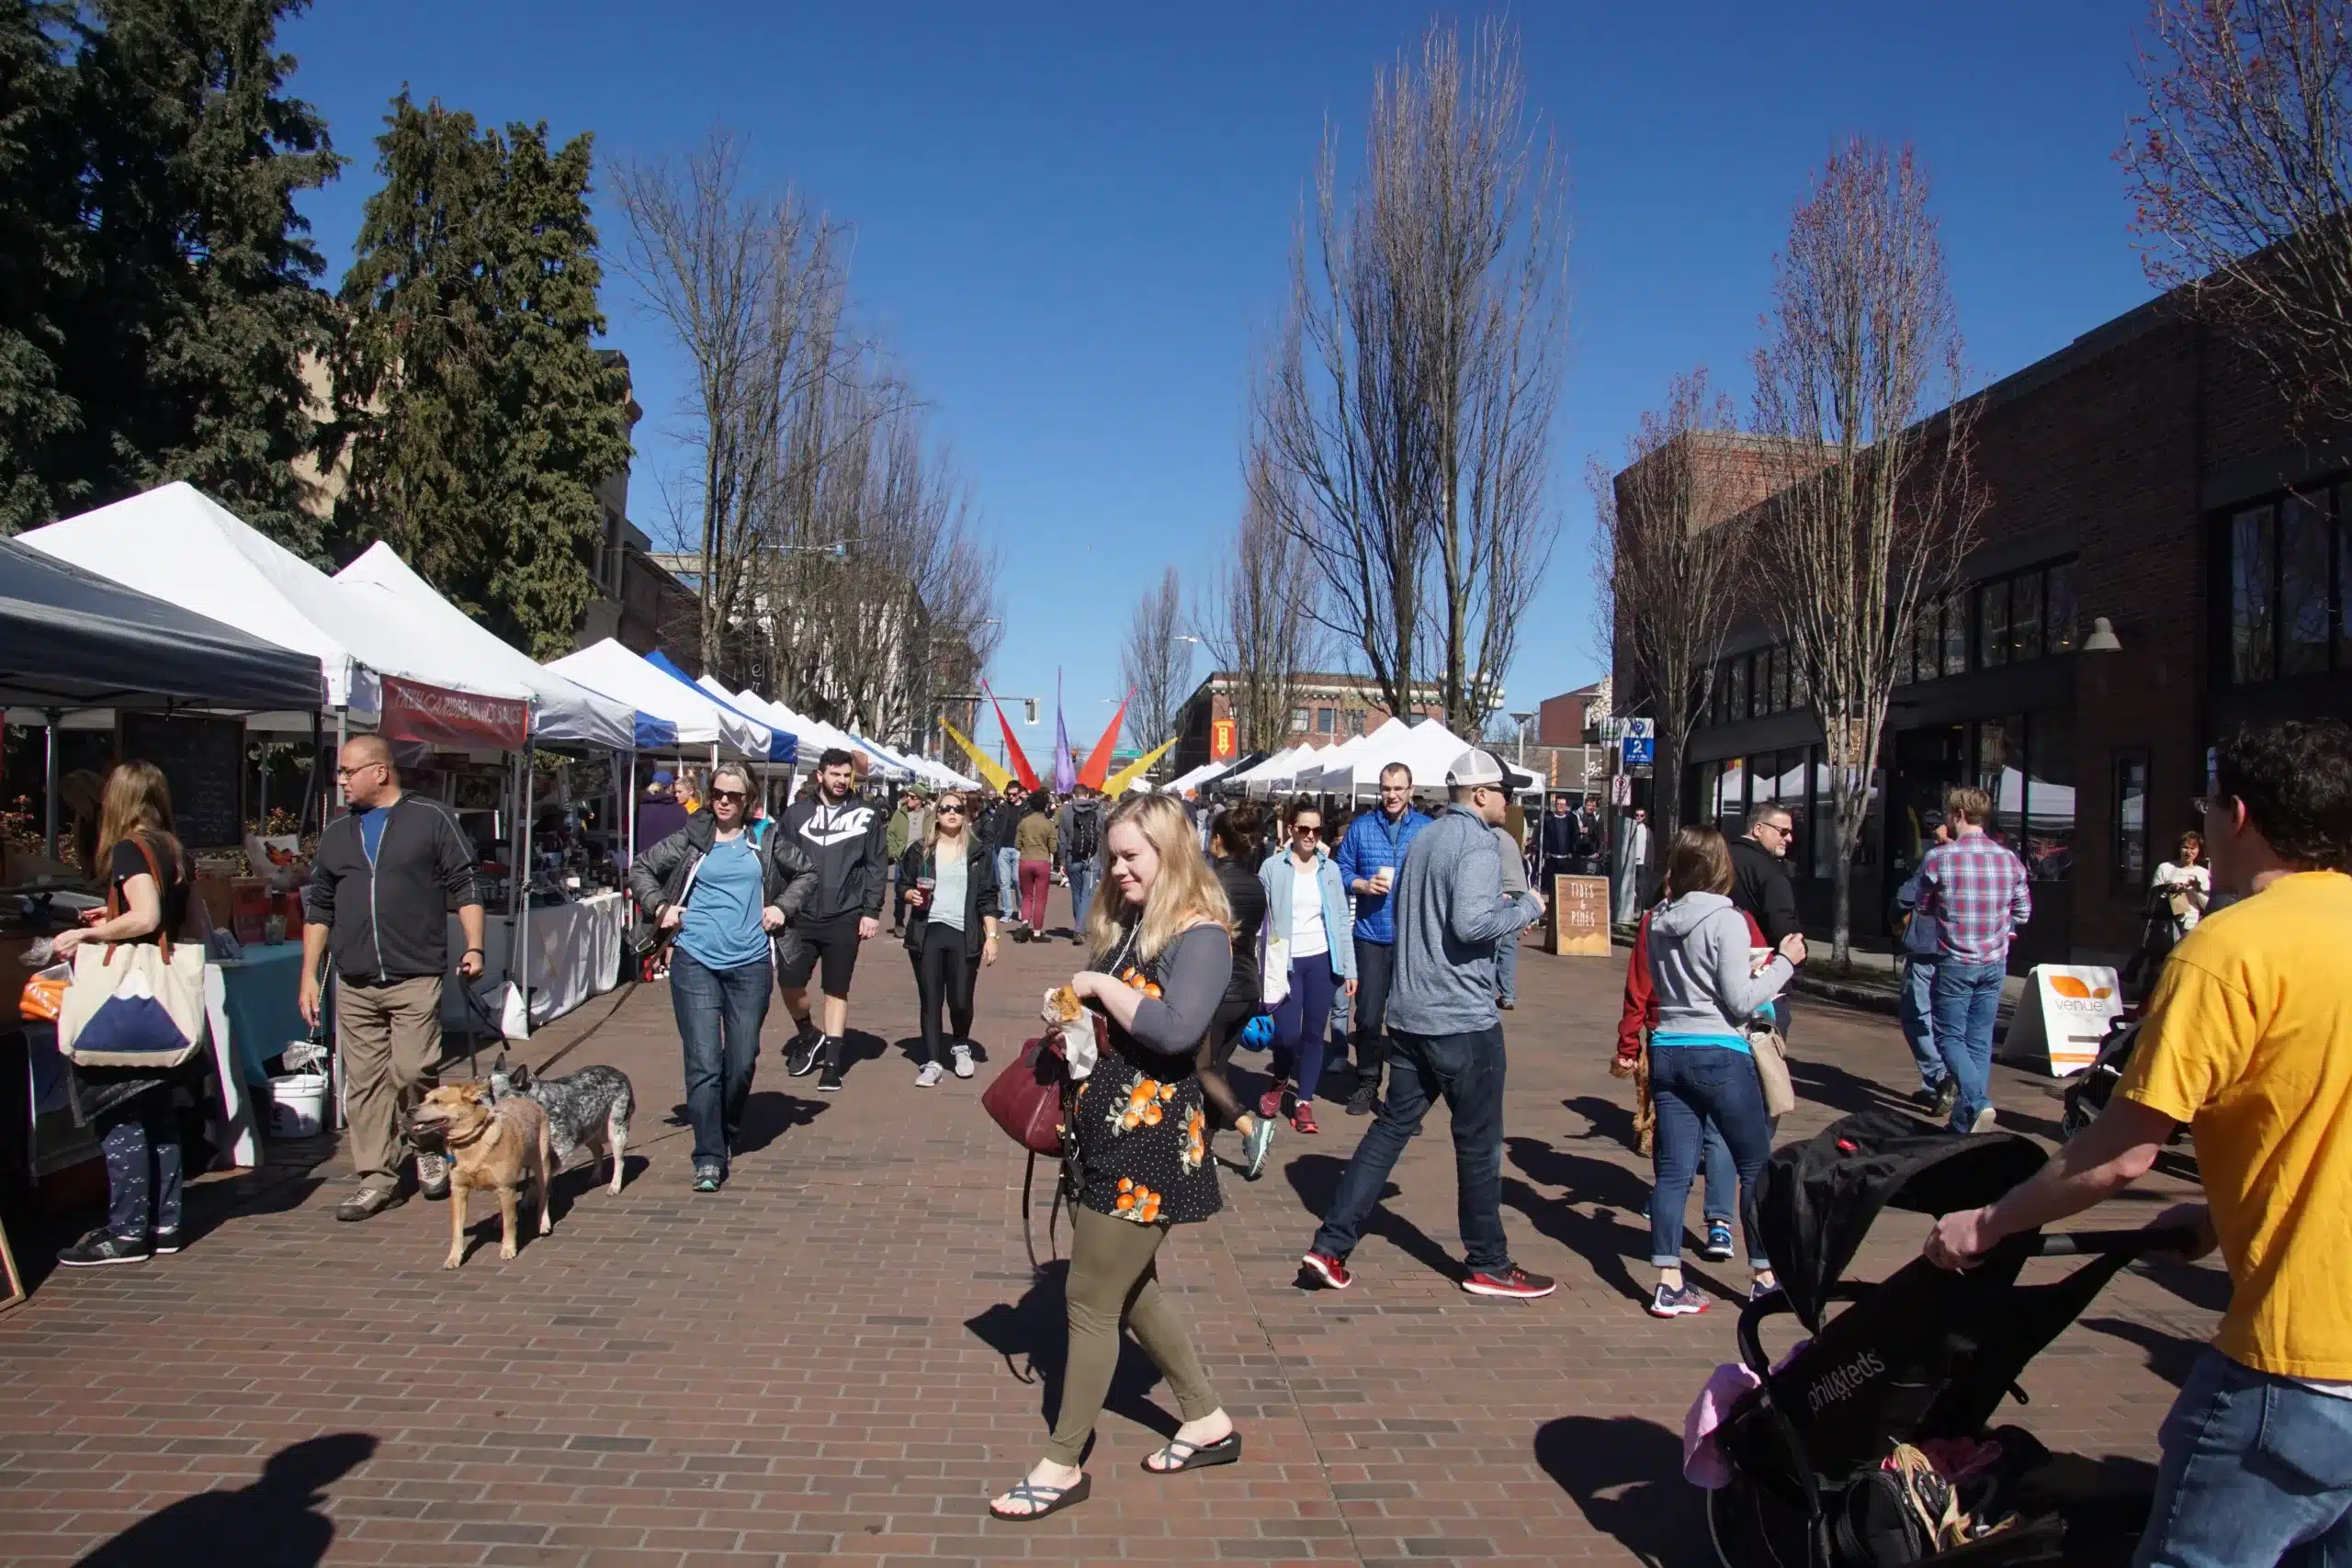 The Best 10 Farmers Markets In Seattle and the Puget Sound